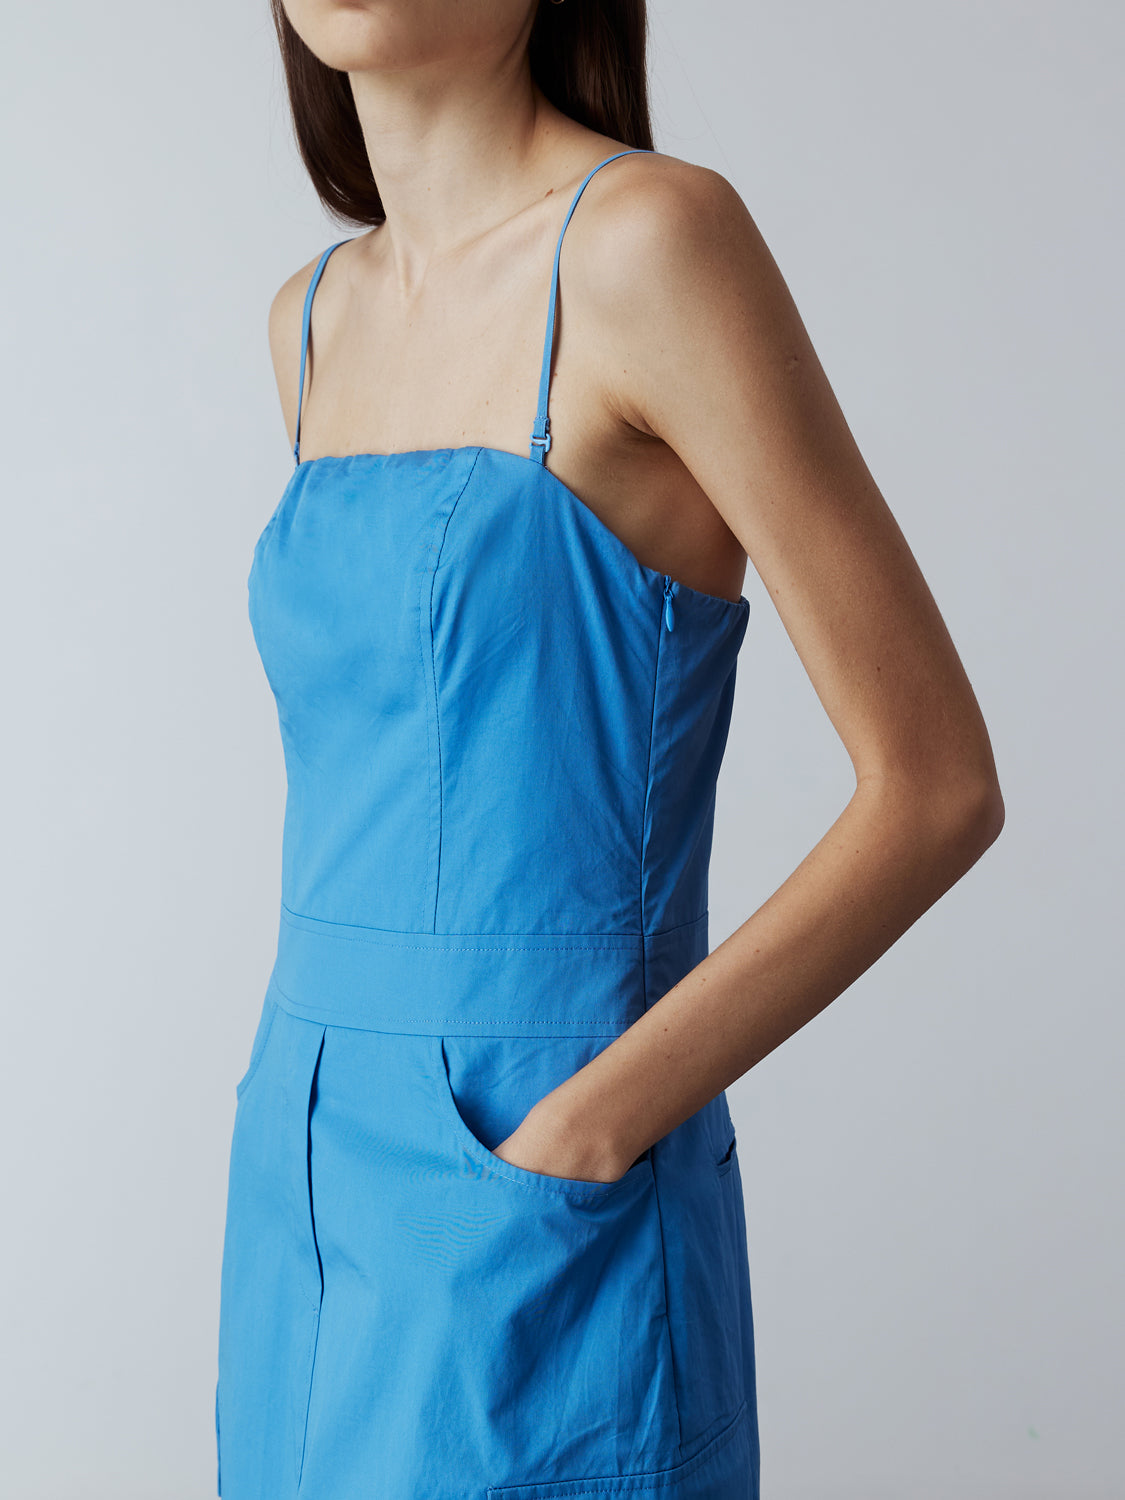 Model is wearing the Adjustable Cargo Dress in Blue, which comes with back pockets, and cargo and slash pockets at the sides. This is a sleeveless garment with adjustable spaghetti straps. Can also be worn as a tube dress. Worn with Fitted Long Sleeve T-Shirt in Blue layered under and metallic silver heels.